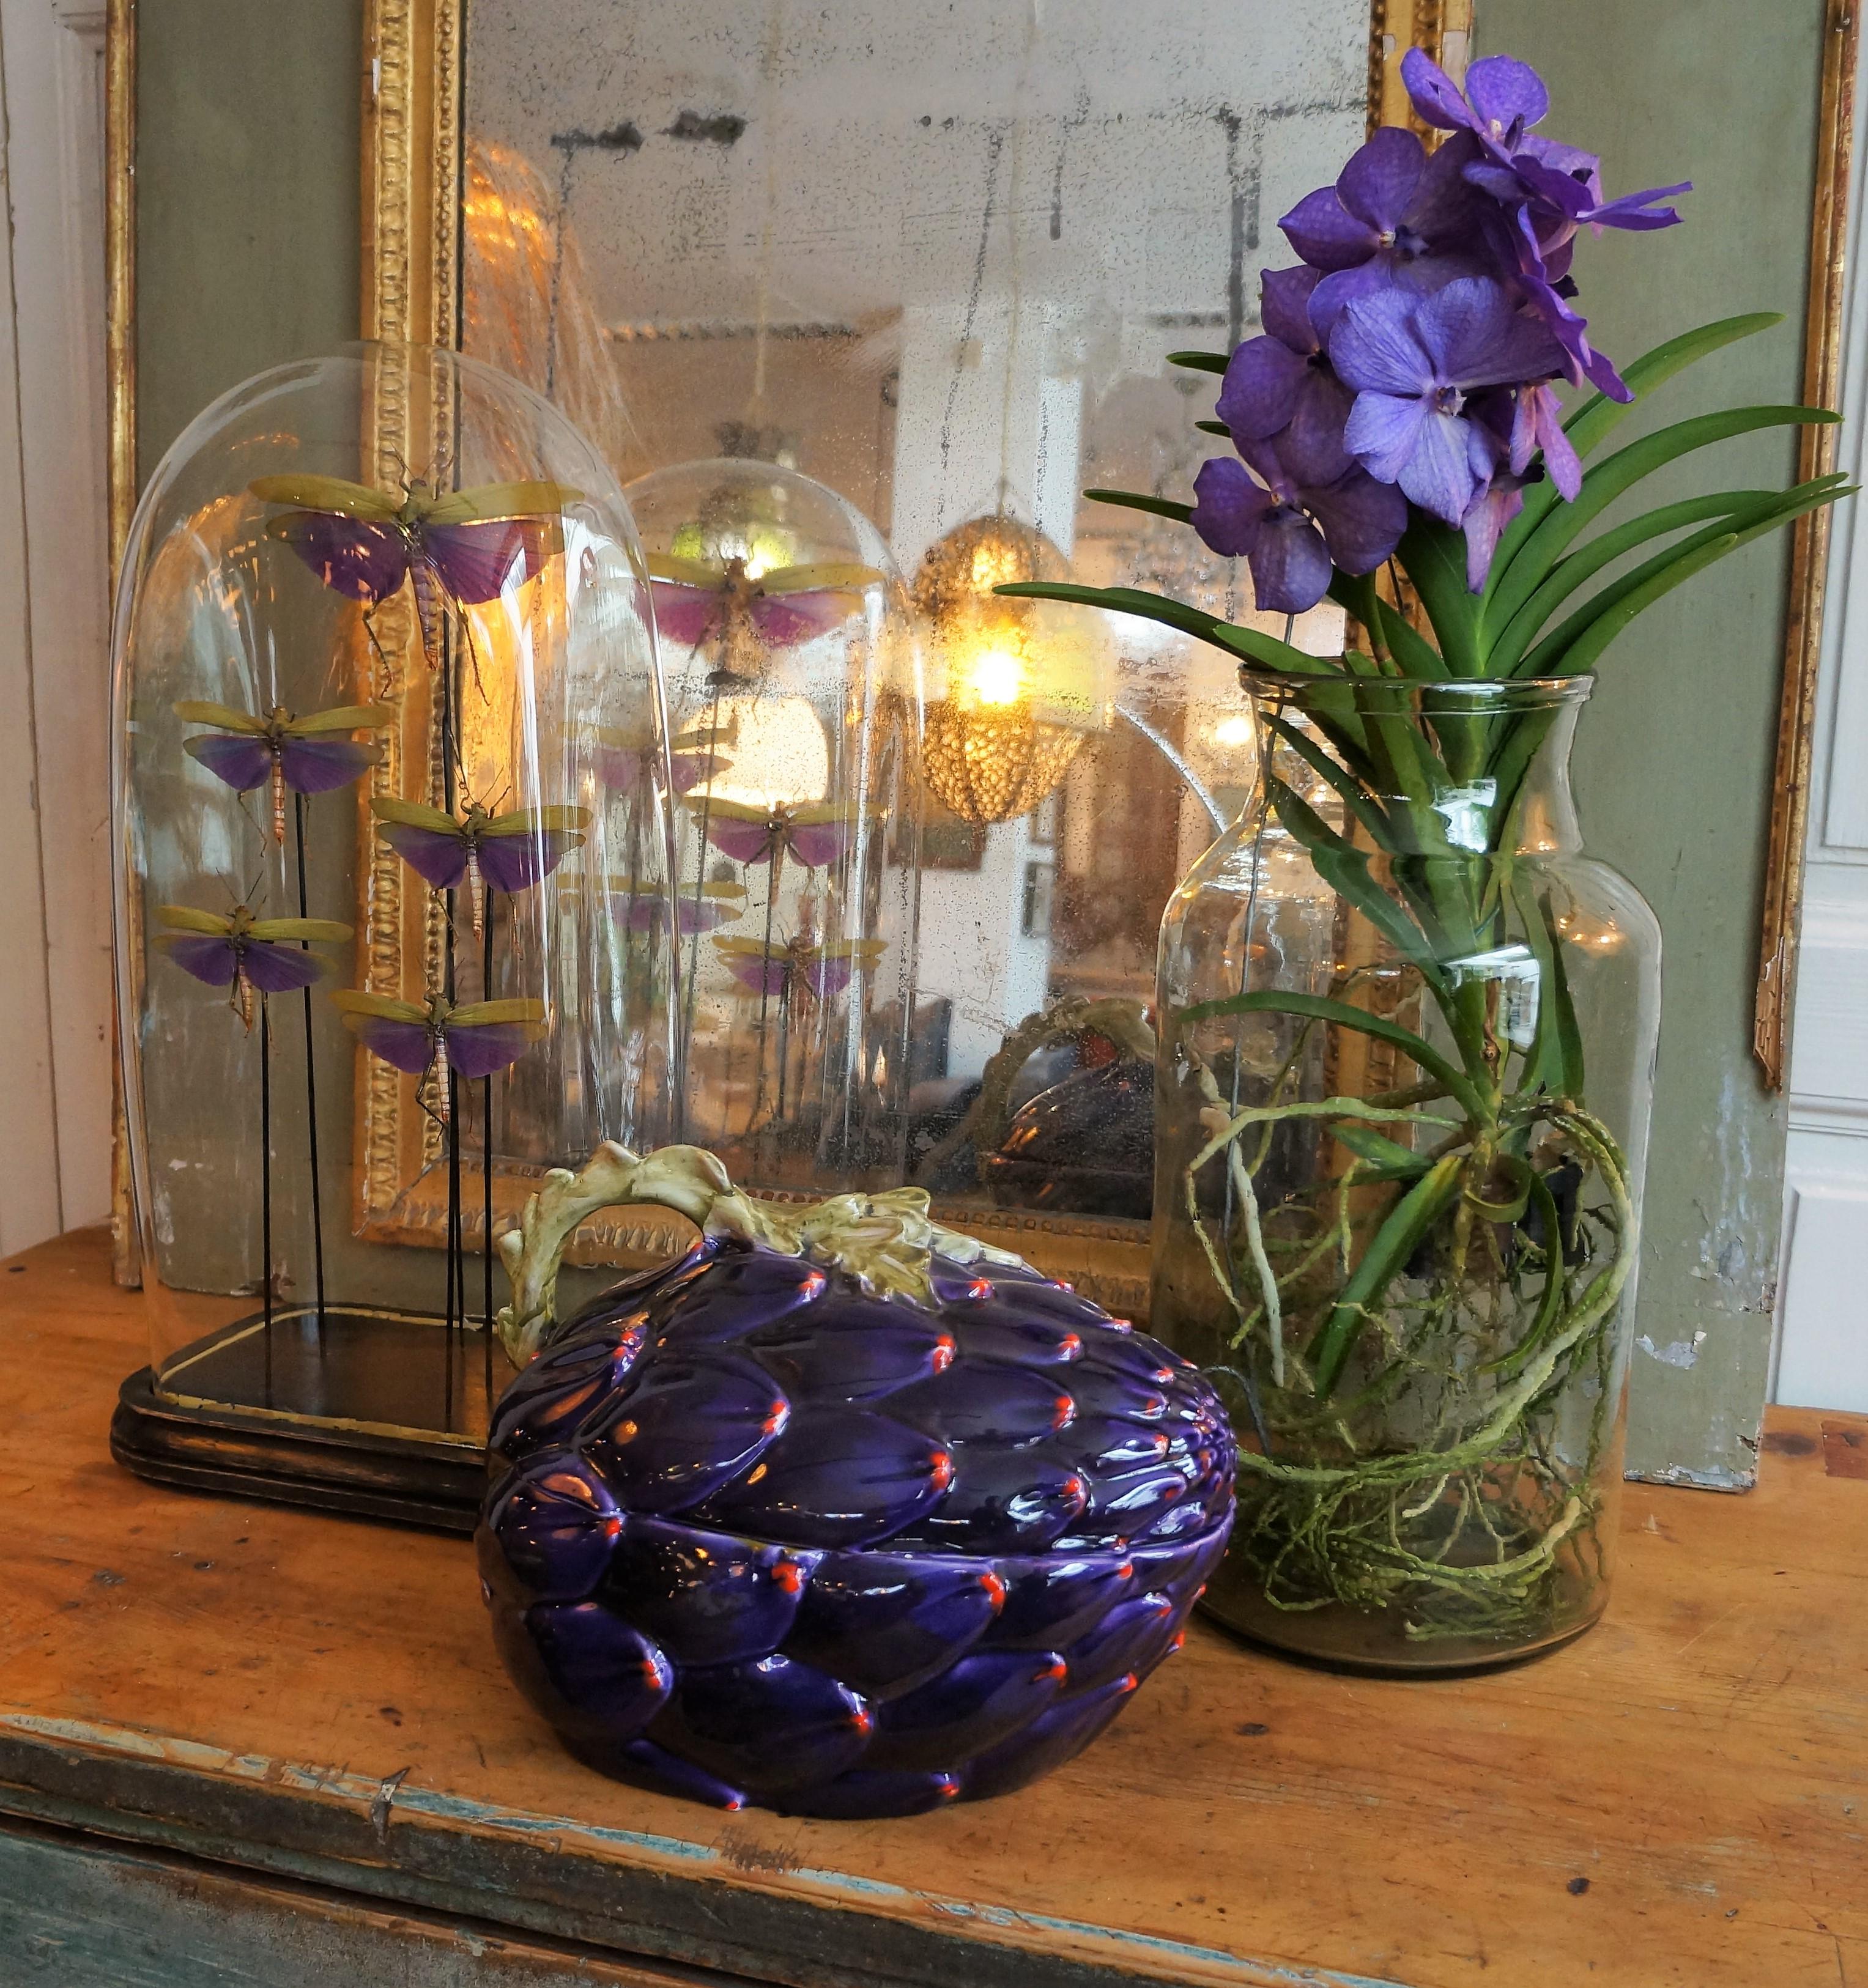 Extra-large Purple Porcelain Artichoke terrine with lid.
This piece is directly from Mancioli, Italy.